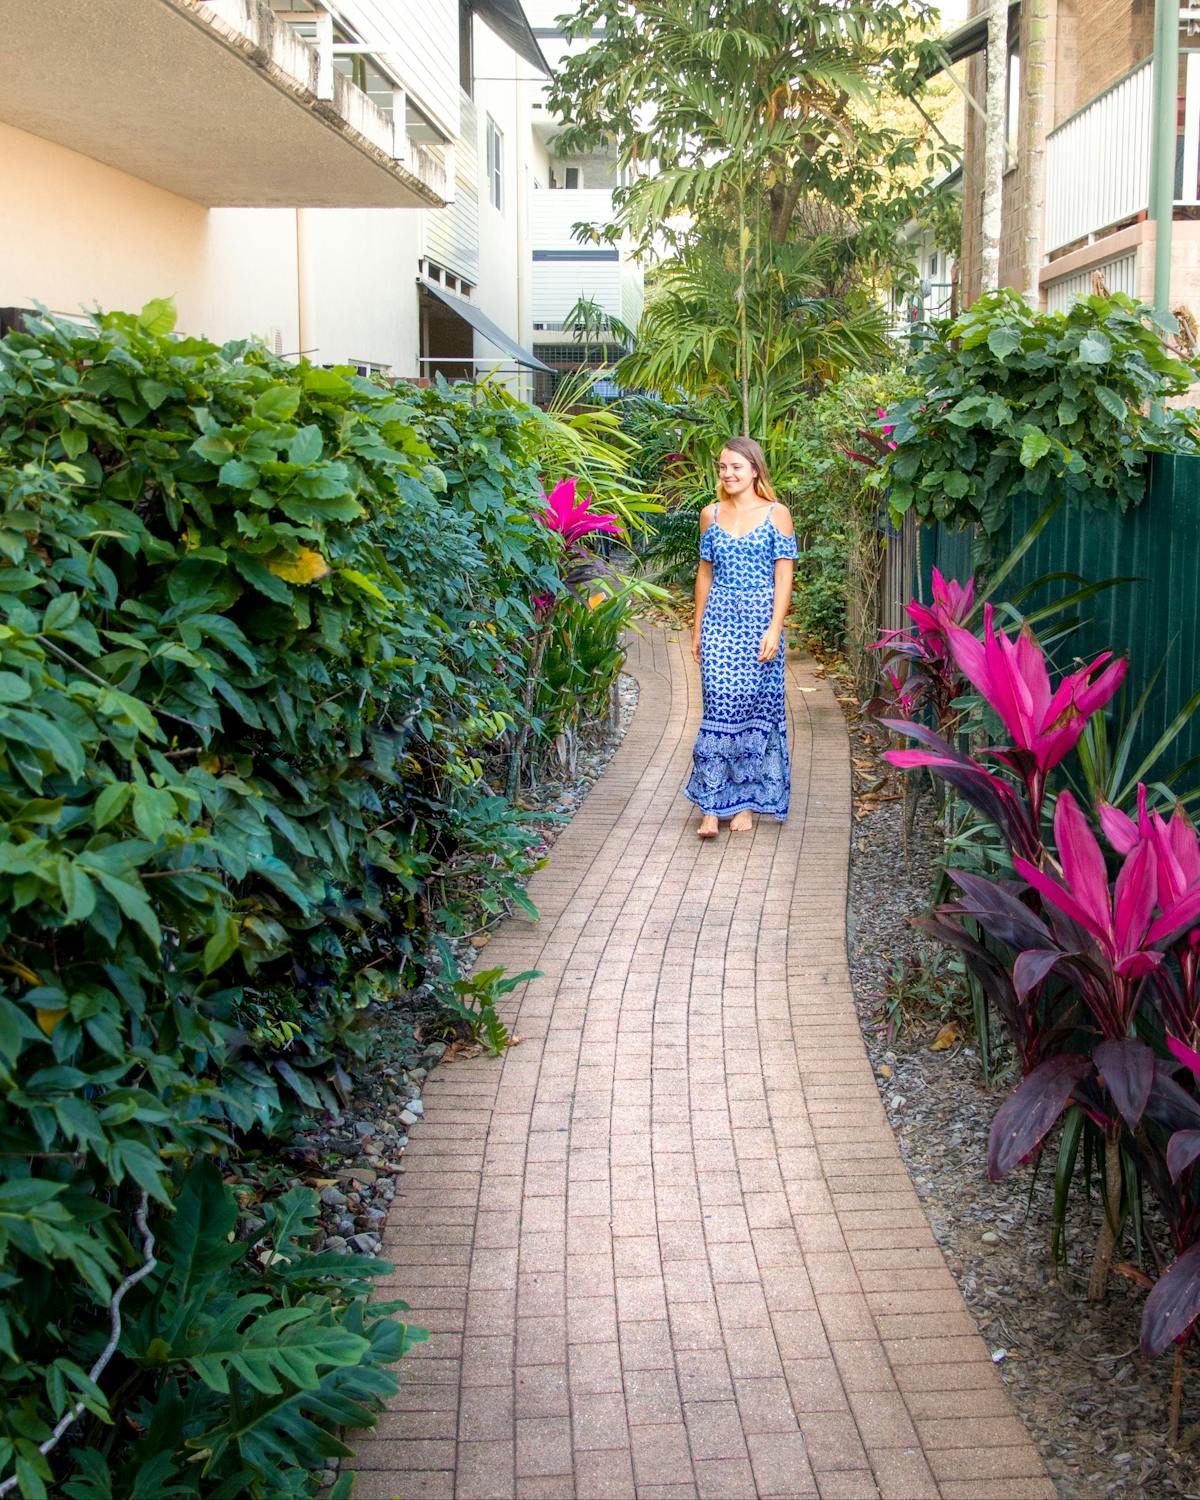 Pathway surrounded by tropical gardens